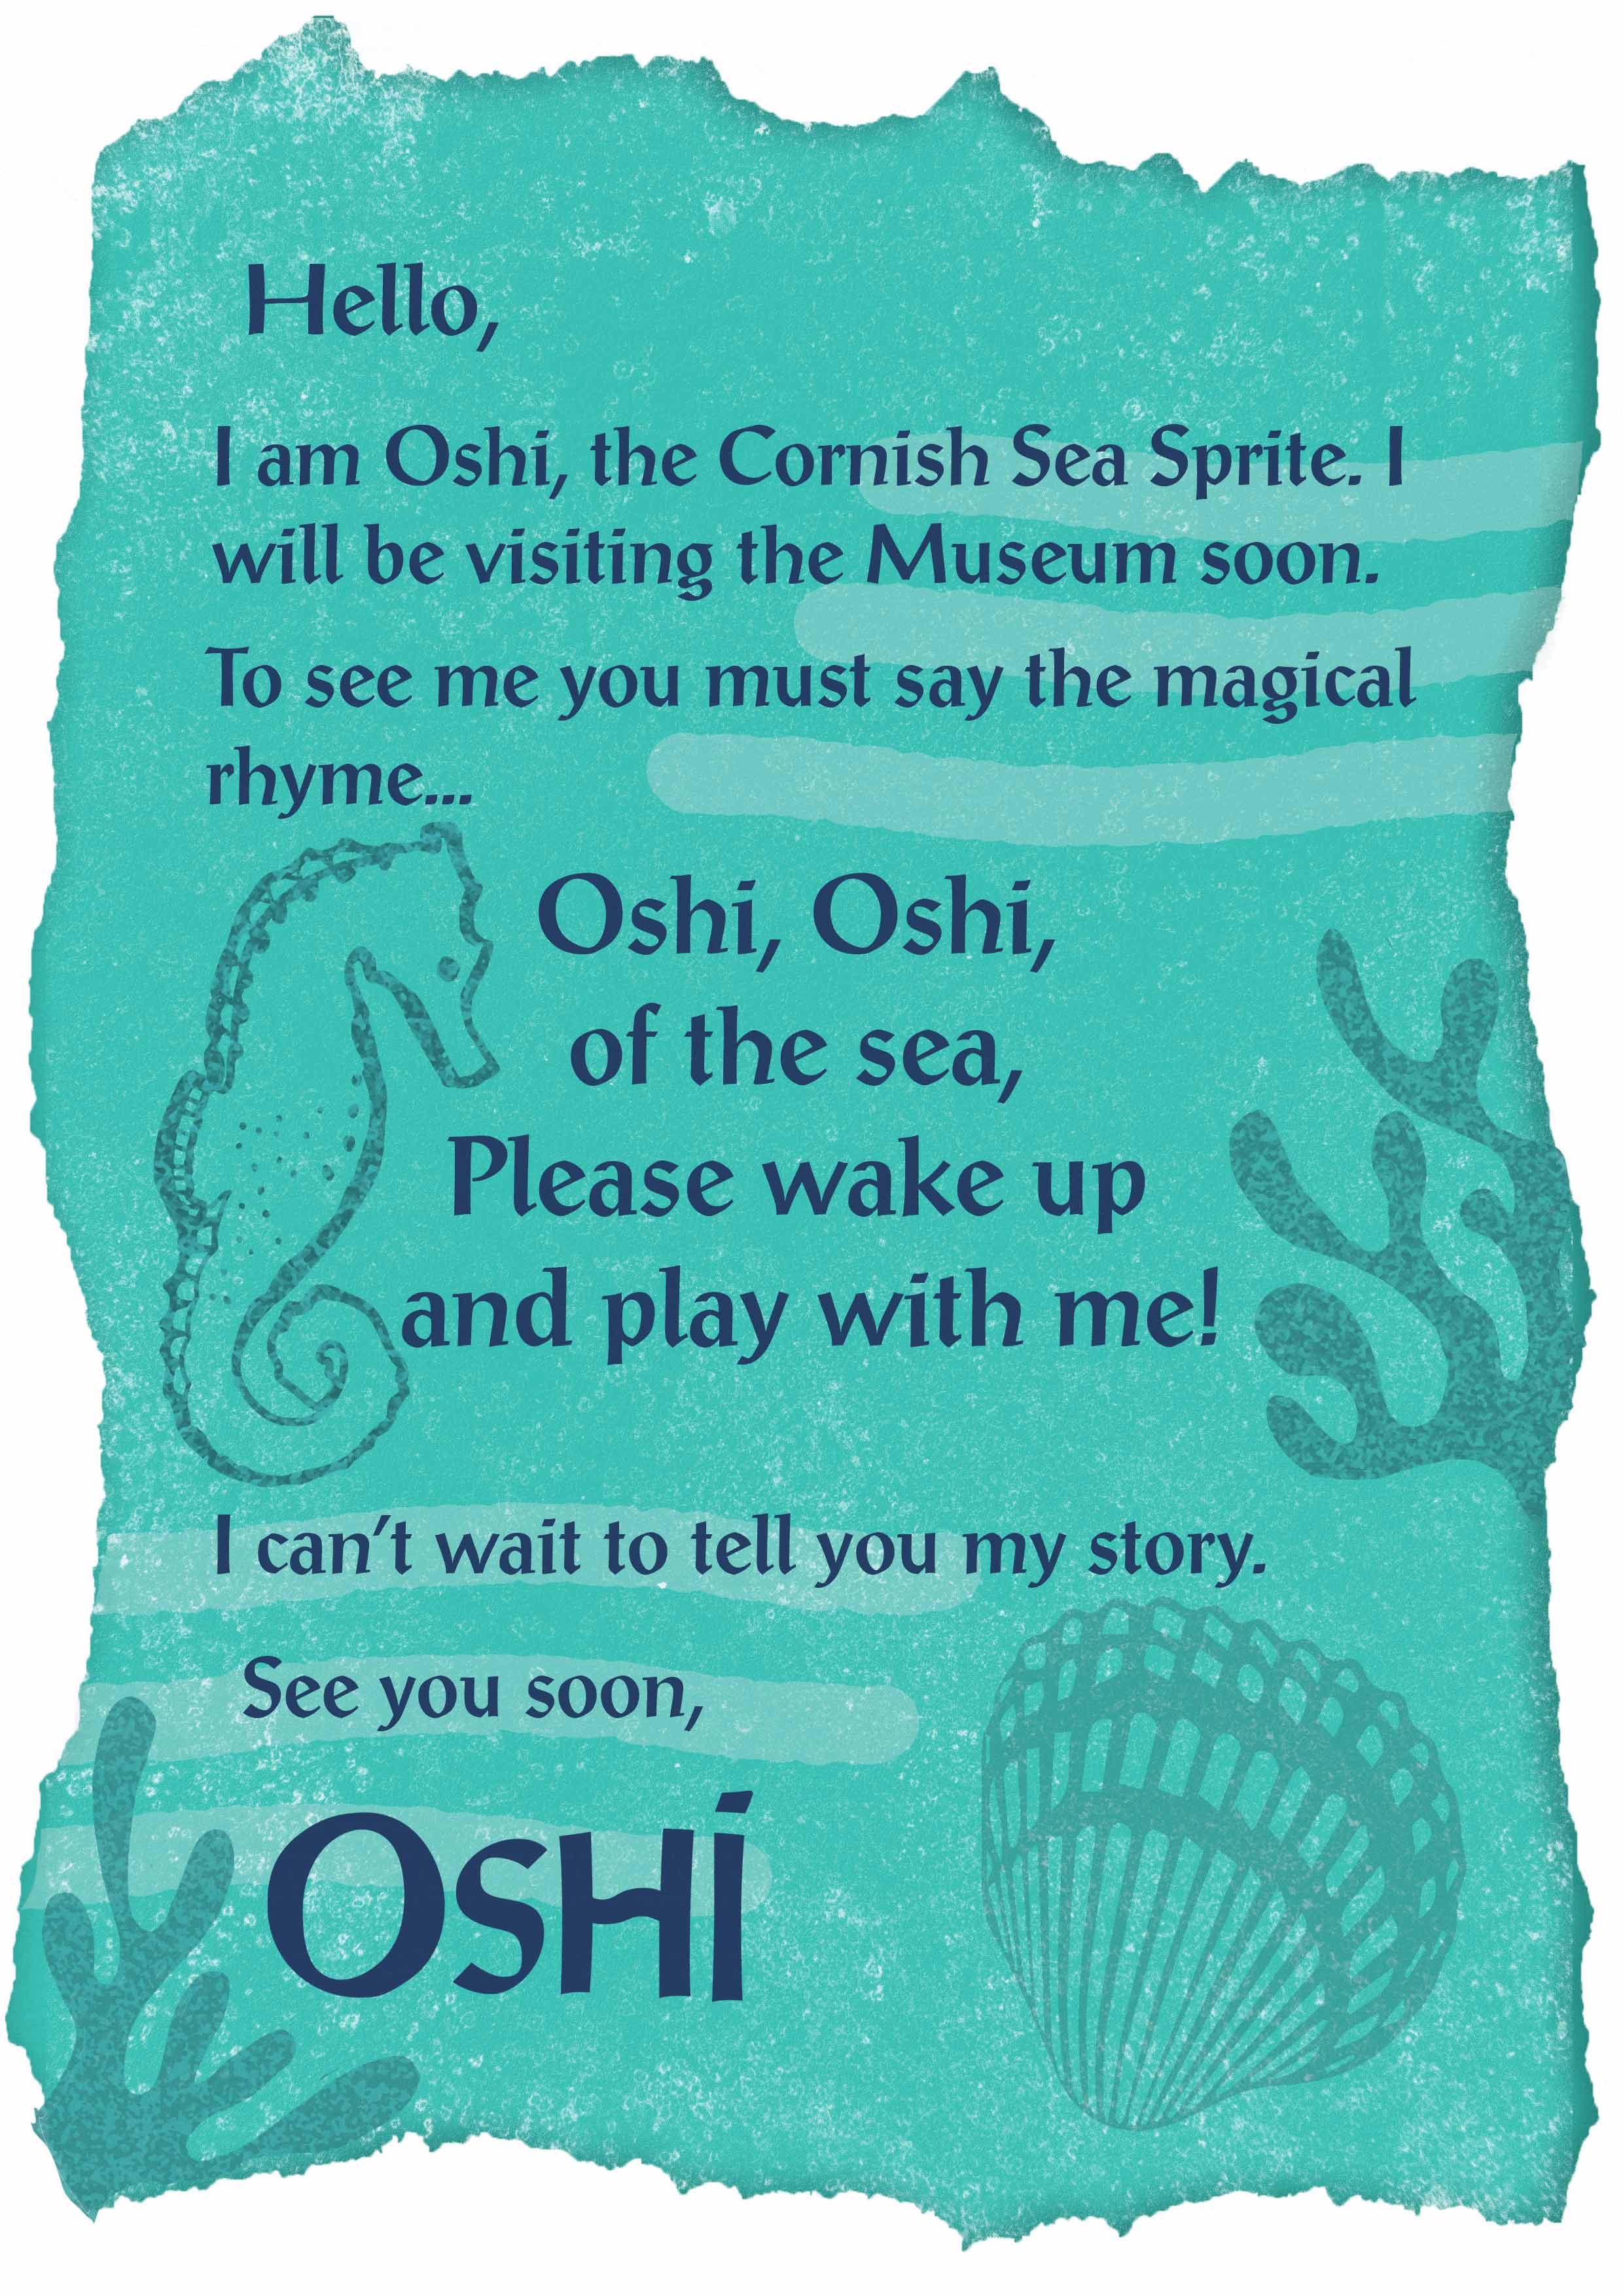 Photo of a letter with typed text on it. It reads 'Hello. I am Oshi, the Cornish Sea Sprite. I will be visiting the Museum soon. To see me you must say the magical rhyme: Oshi, Oshi, of the sea, please wake up and play with me! I can't wait to tell you my story. See you soon. Oshi'.